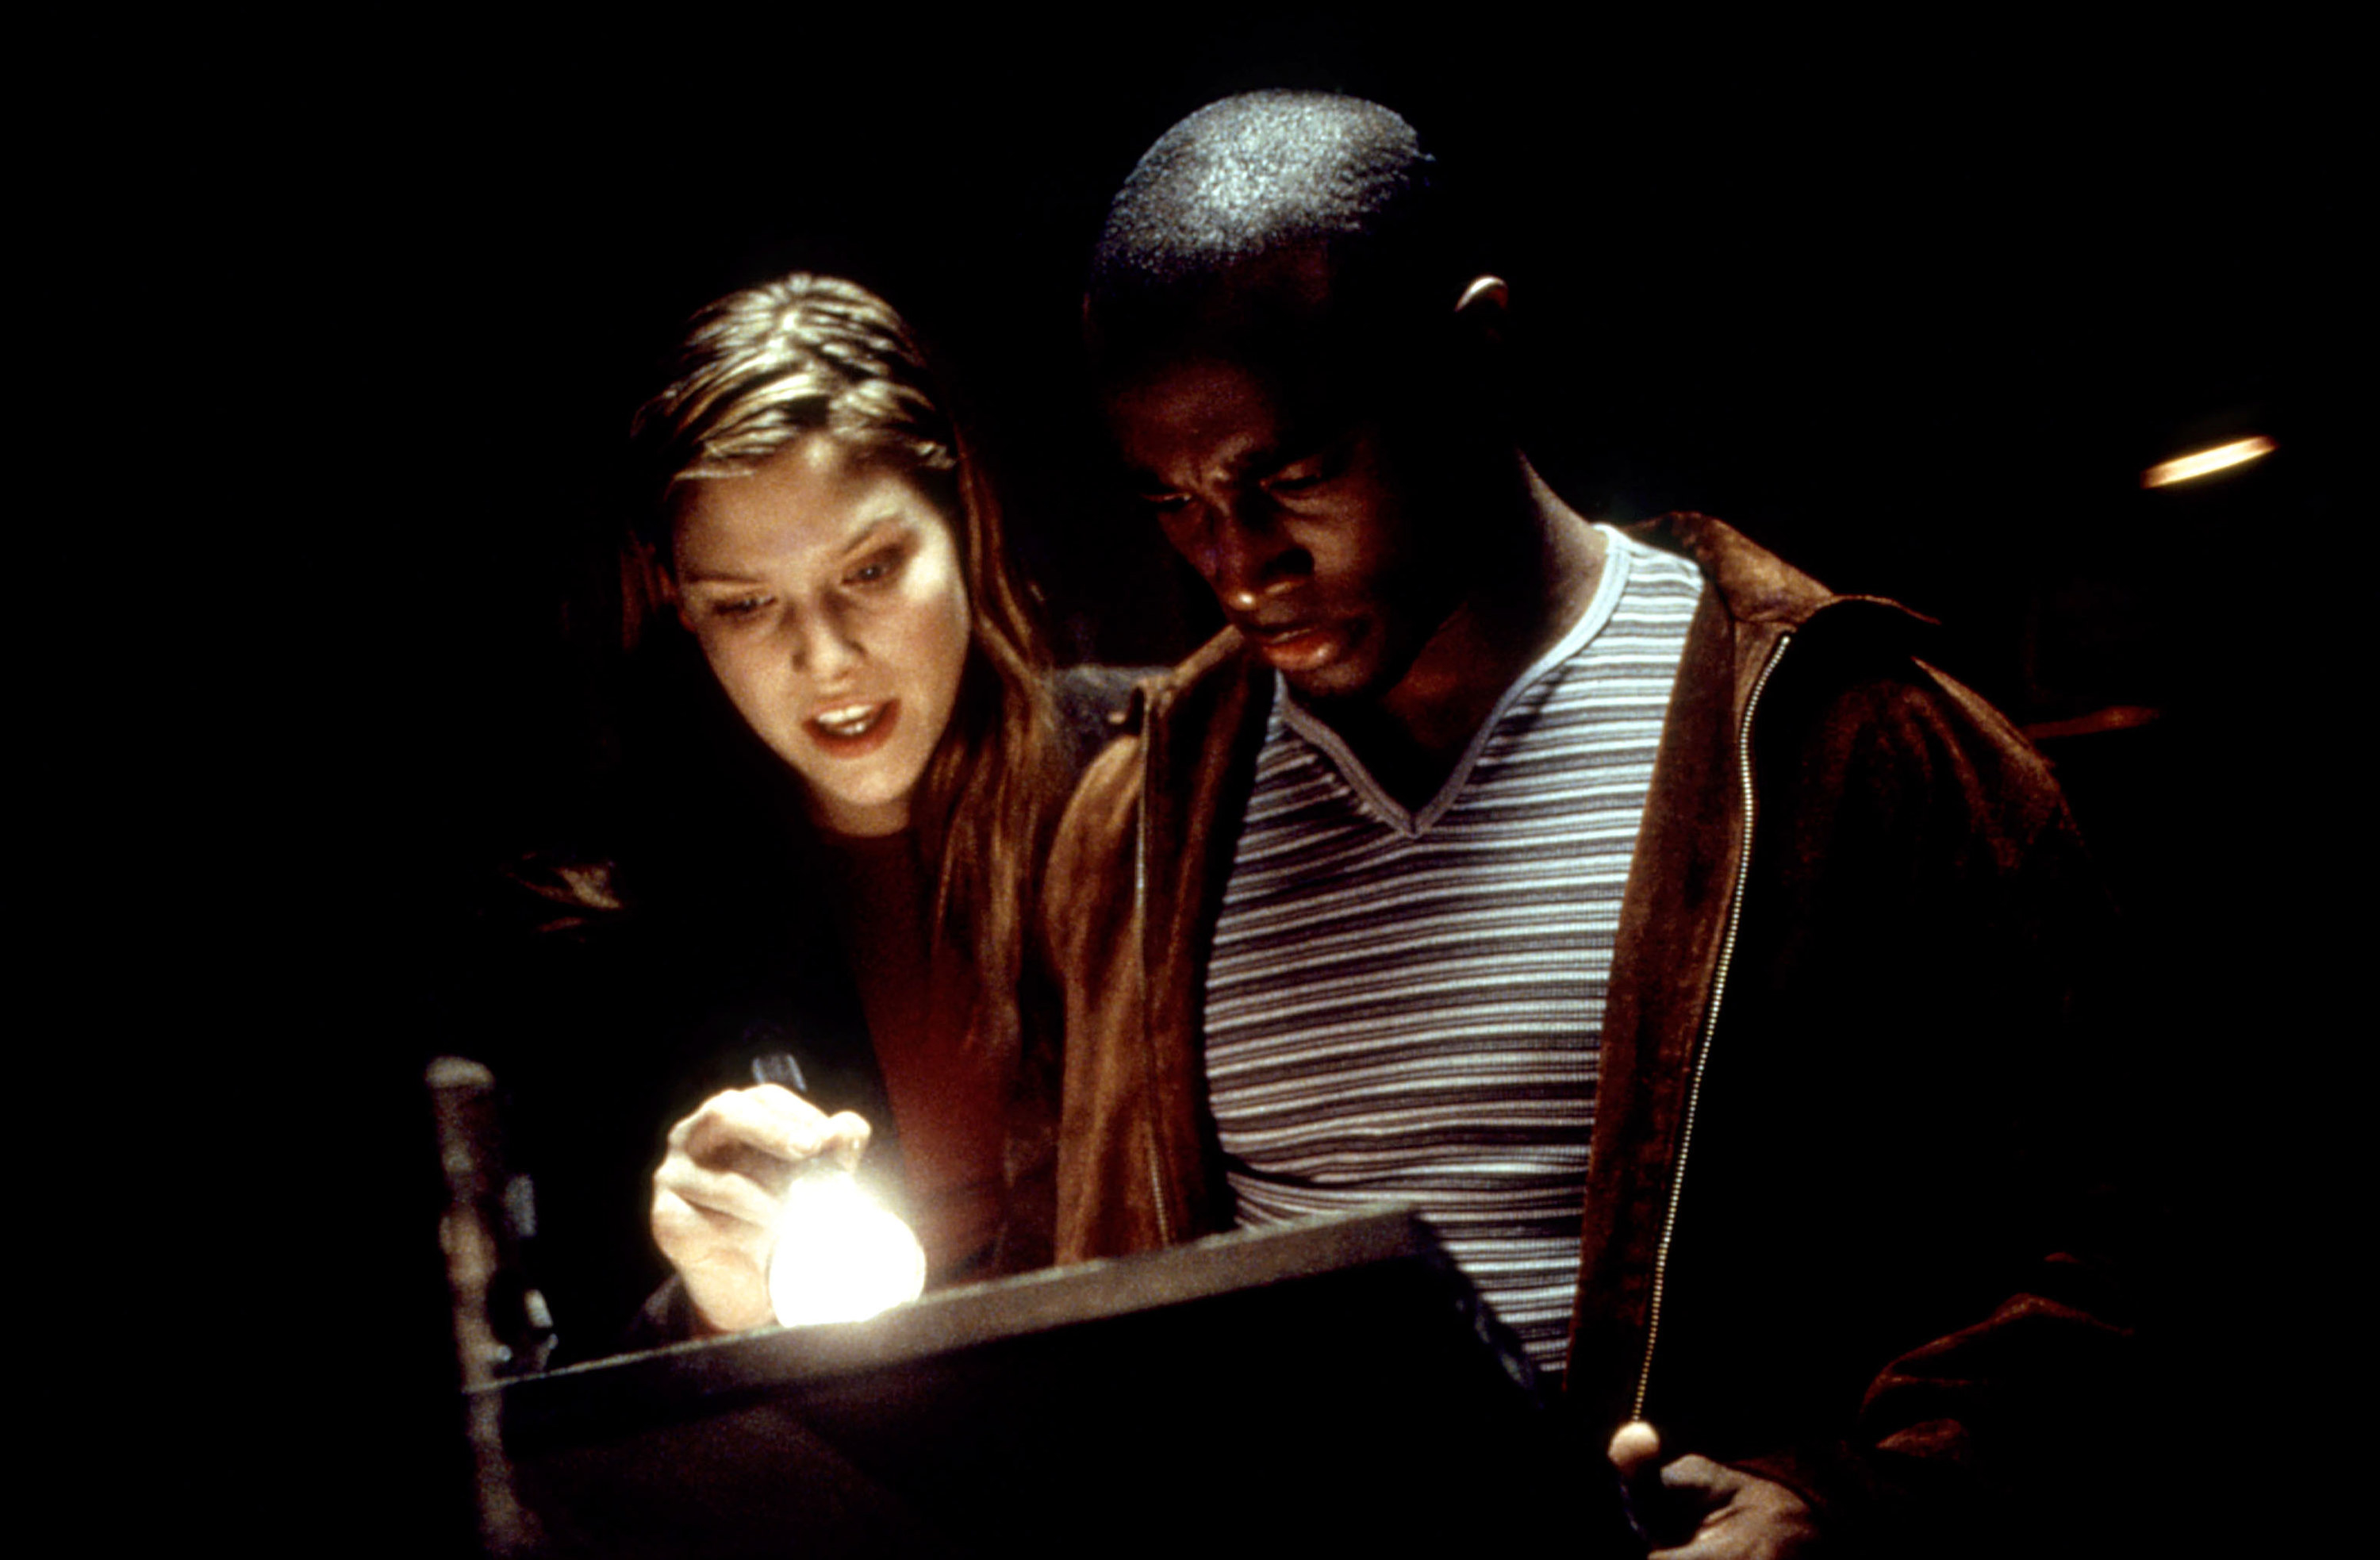 Two people reading something in the dark using a flashlight